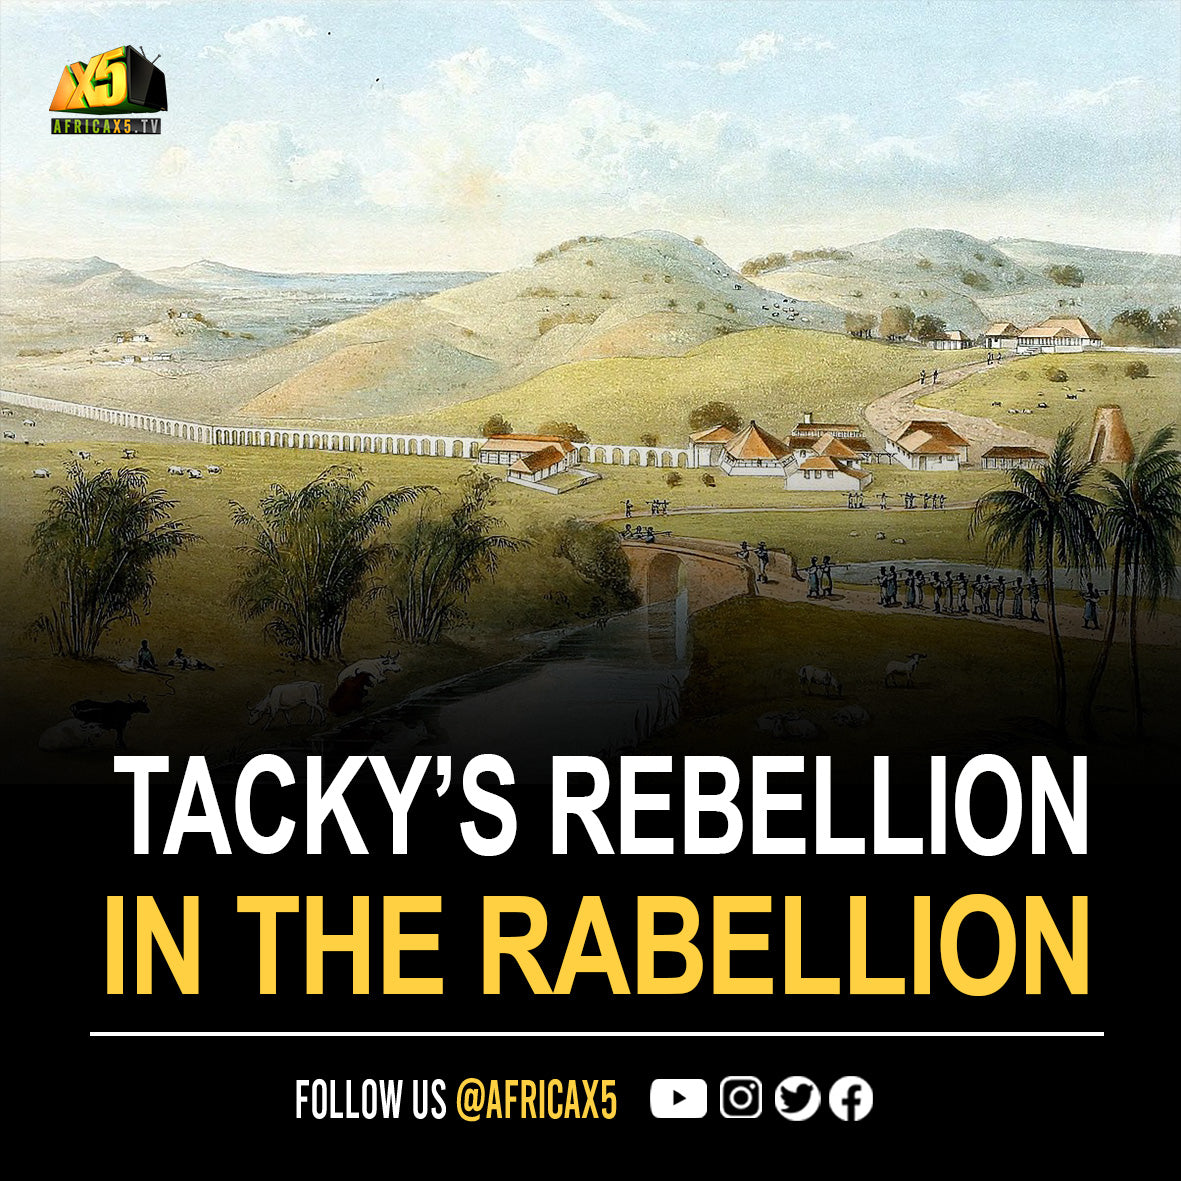 Tacky's War was the most significant slave uprising in the Caribbean between the 1733 slave insurrection on St. John and the 1791 Haitian Revolution.